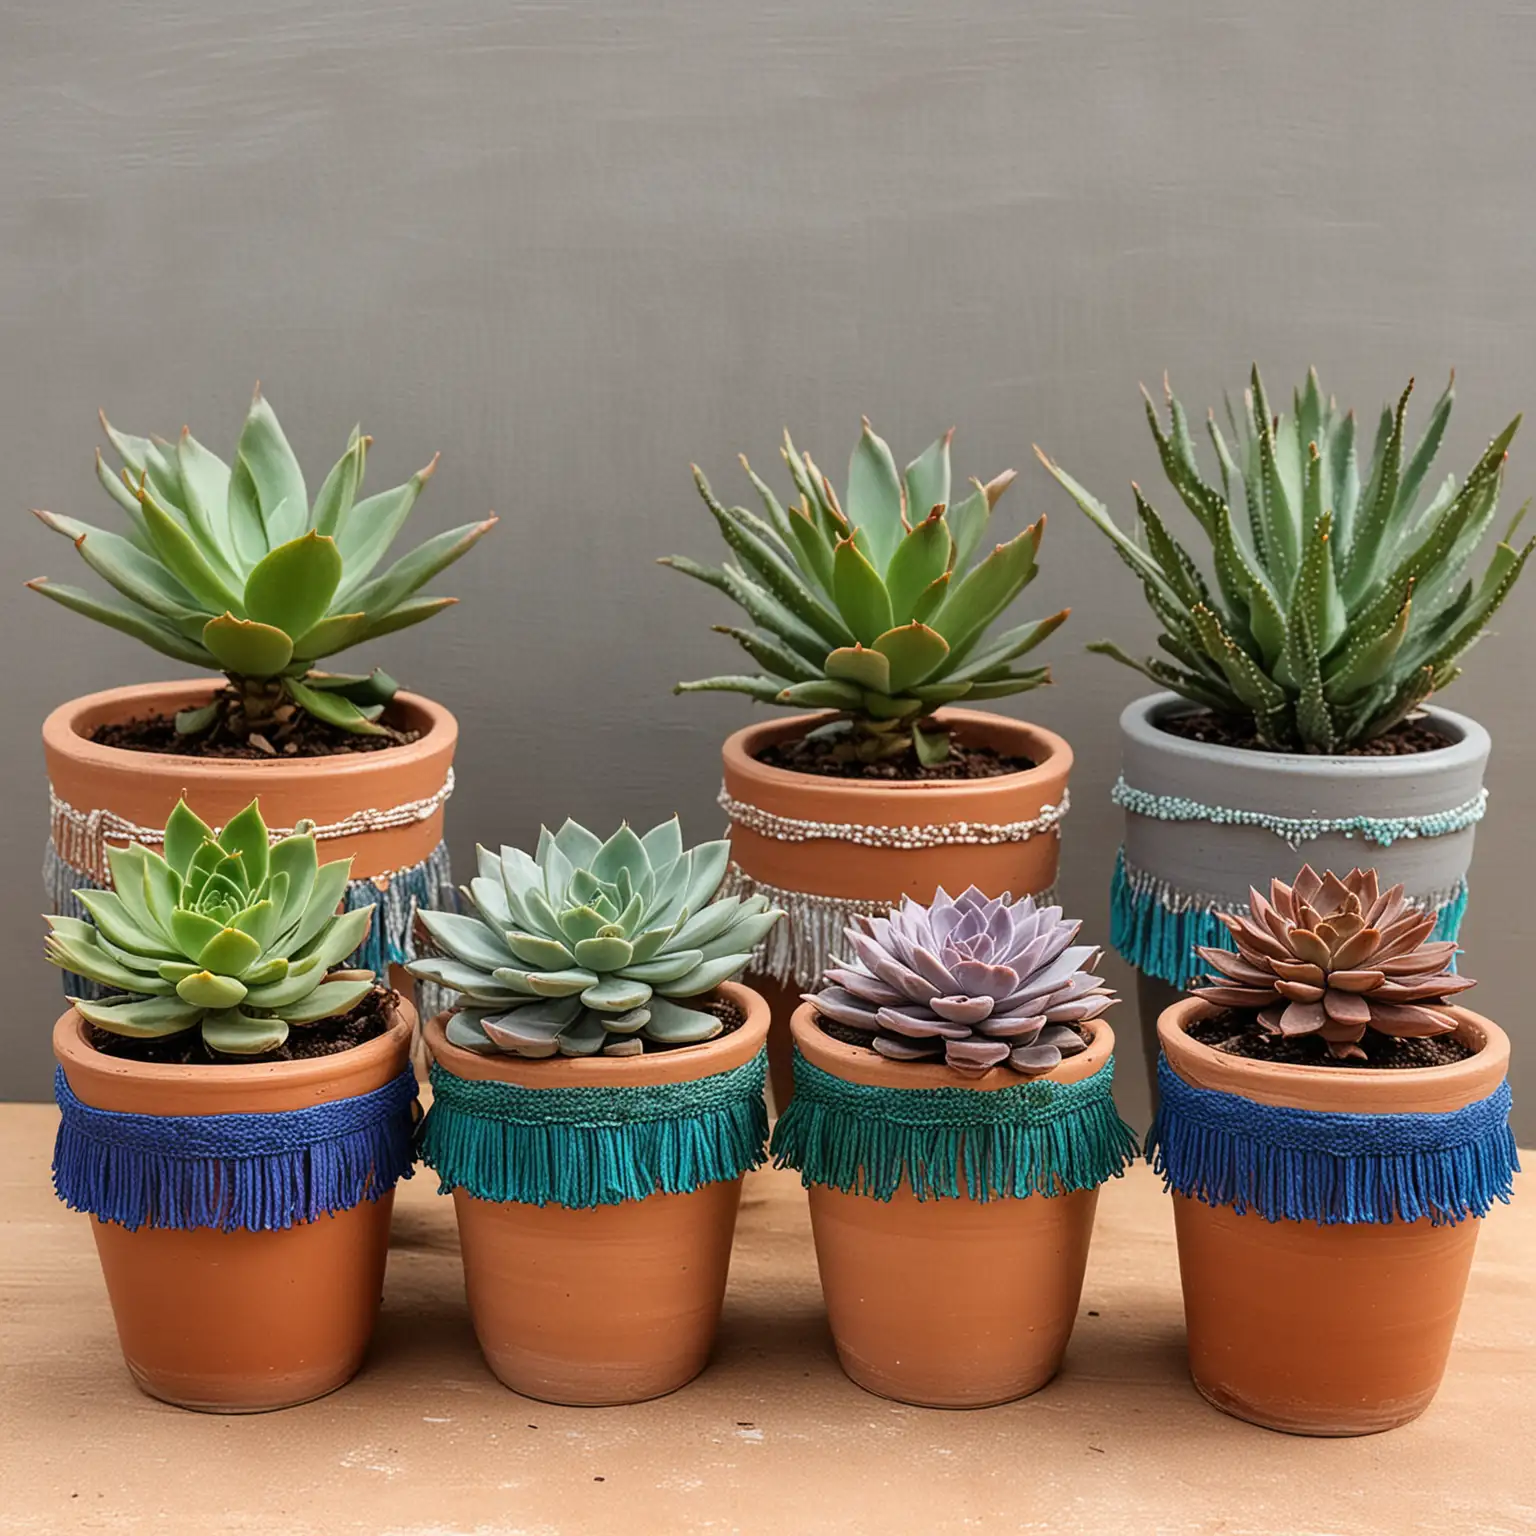 a collection of boho centerpieces in small terra cotta planters that have been painted gem tones like sapphire blue, emerald green and deep purple, wrapped in fringe holding a single succulent in various colors, each with a single feather stuck in the terra cotta pot